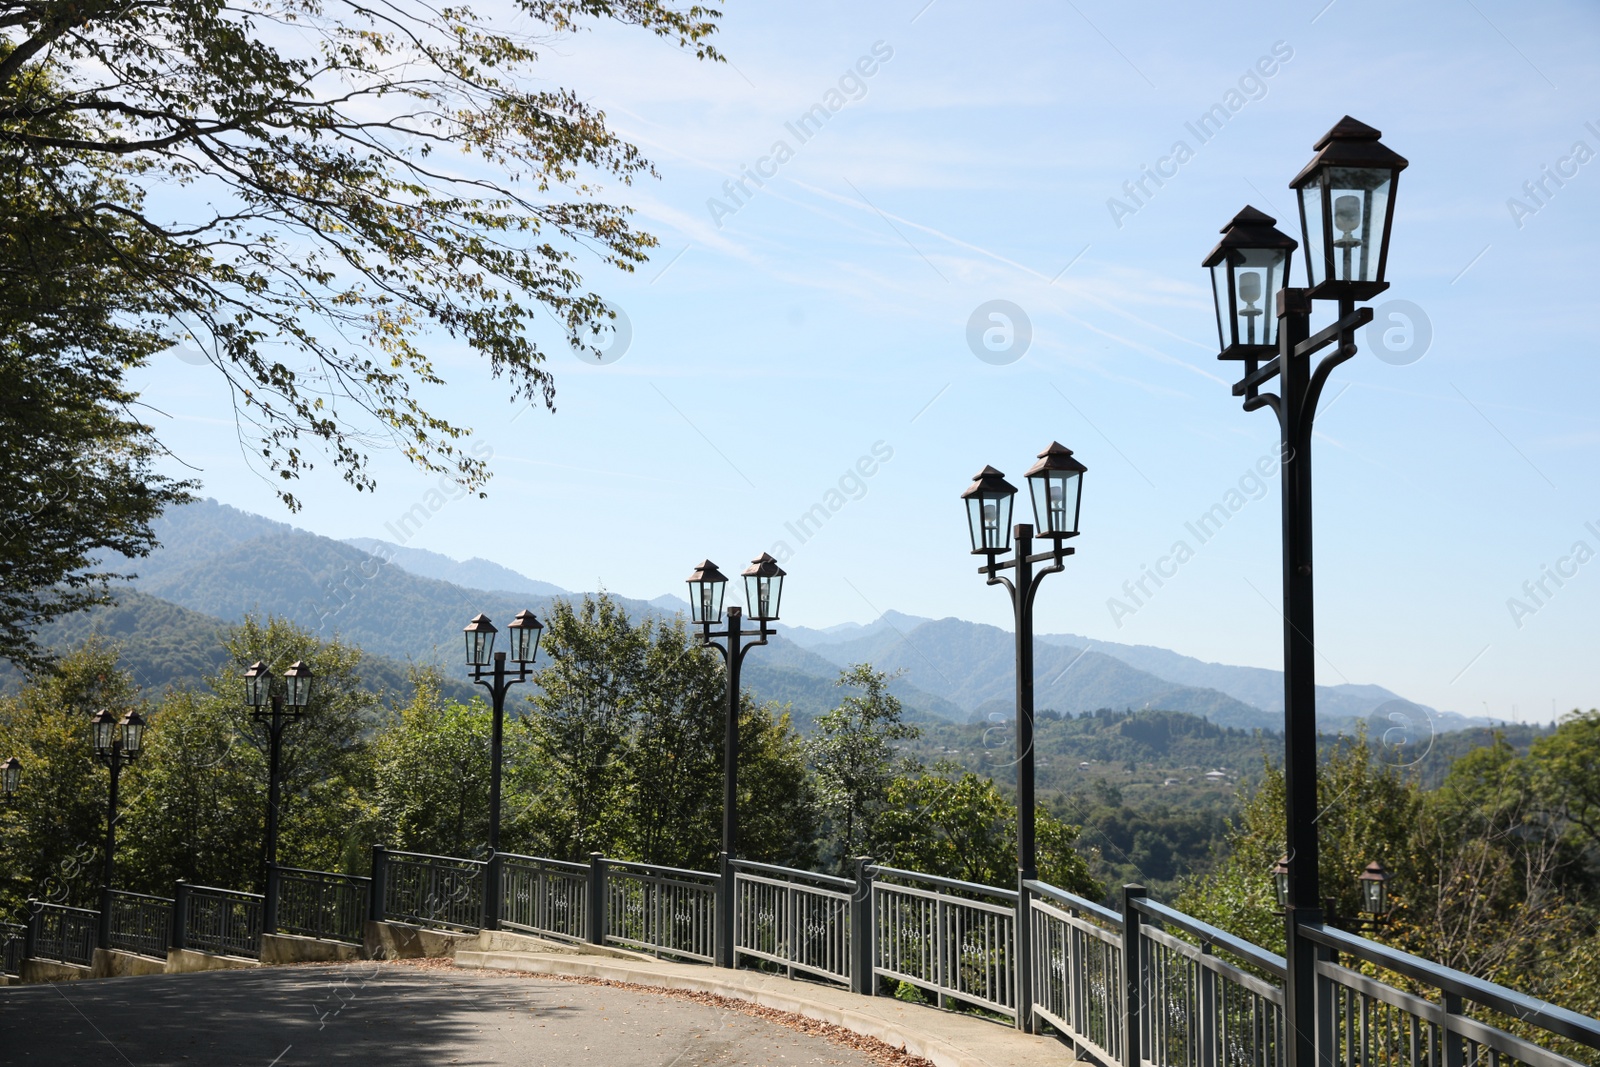 Photo of Beautiful street light lamps near pathway outdoors on sunny day